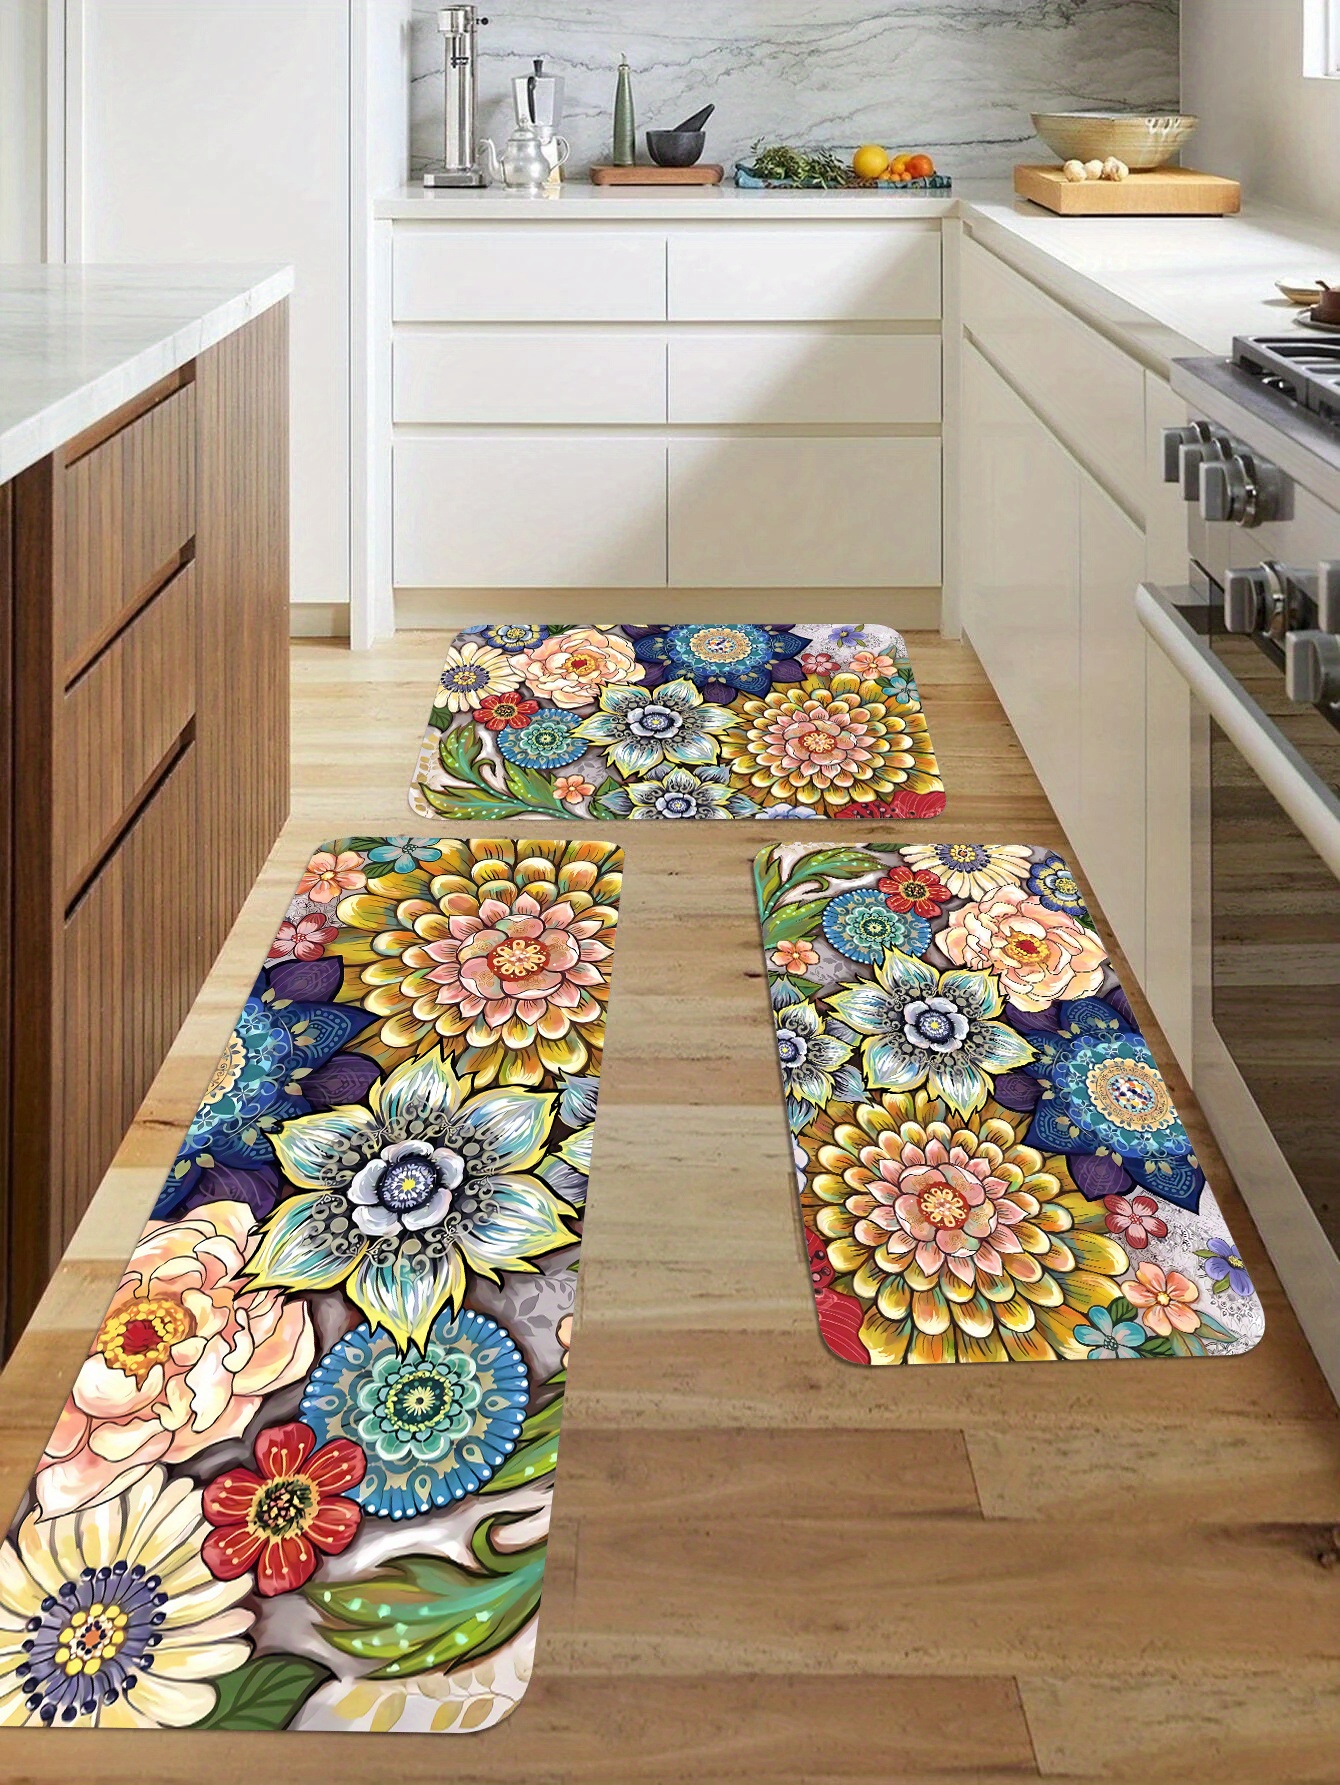 GIBZ Vintage Kitchen Floor Rug Anti Fatigue Extra Large Soft Floral Mat  Washable Leather Pad with Non Slip Backing, 47×70